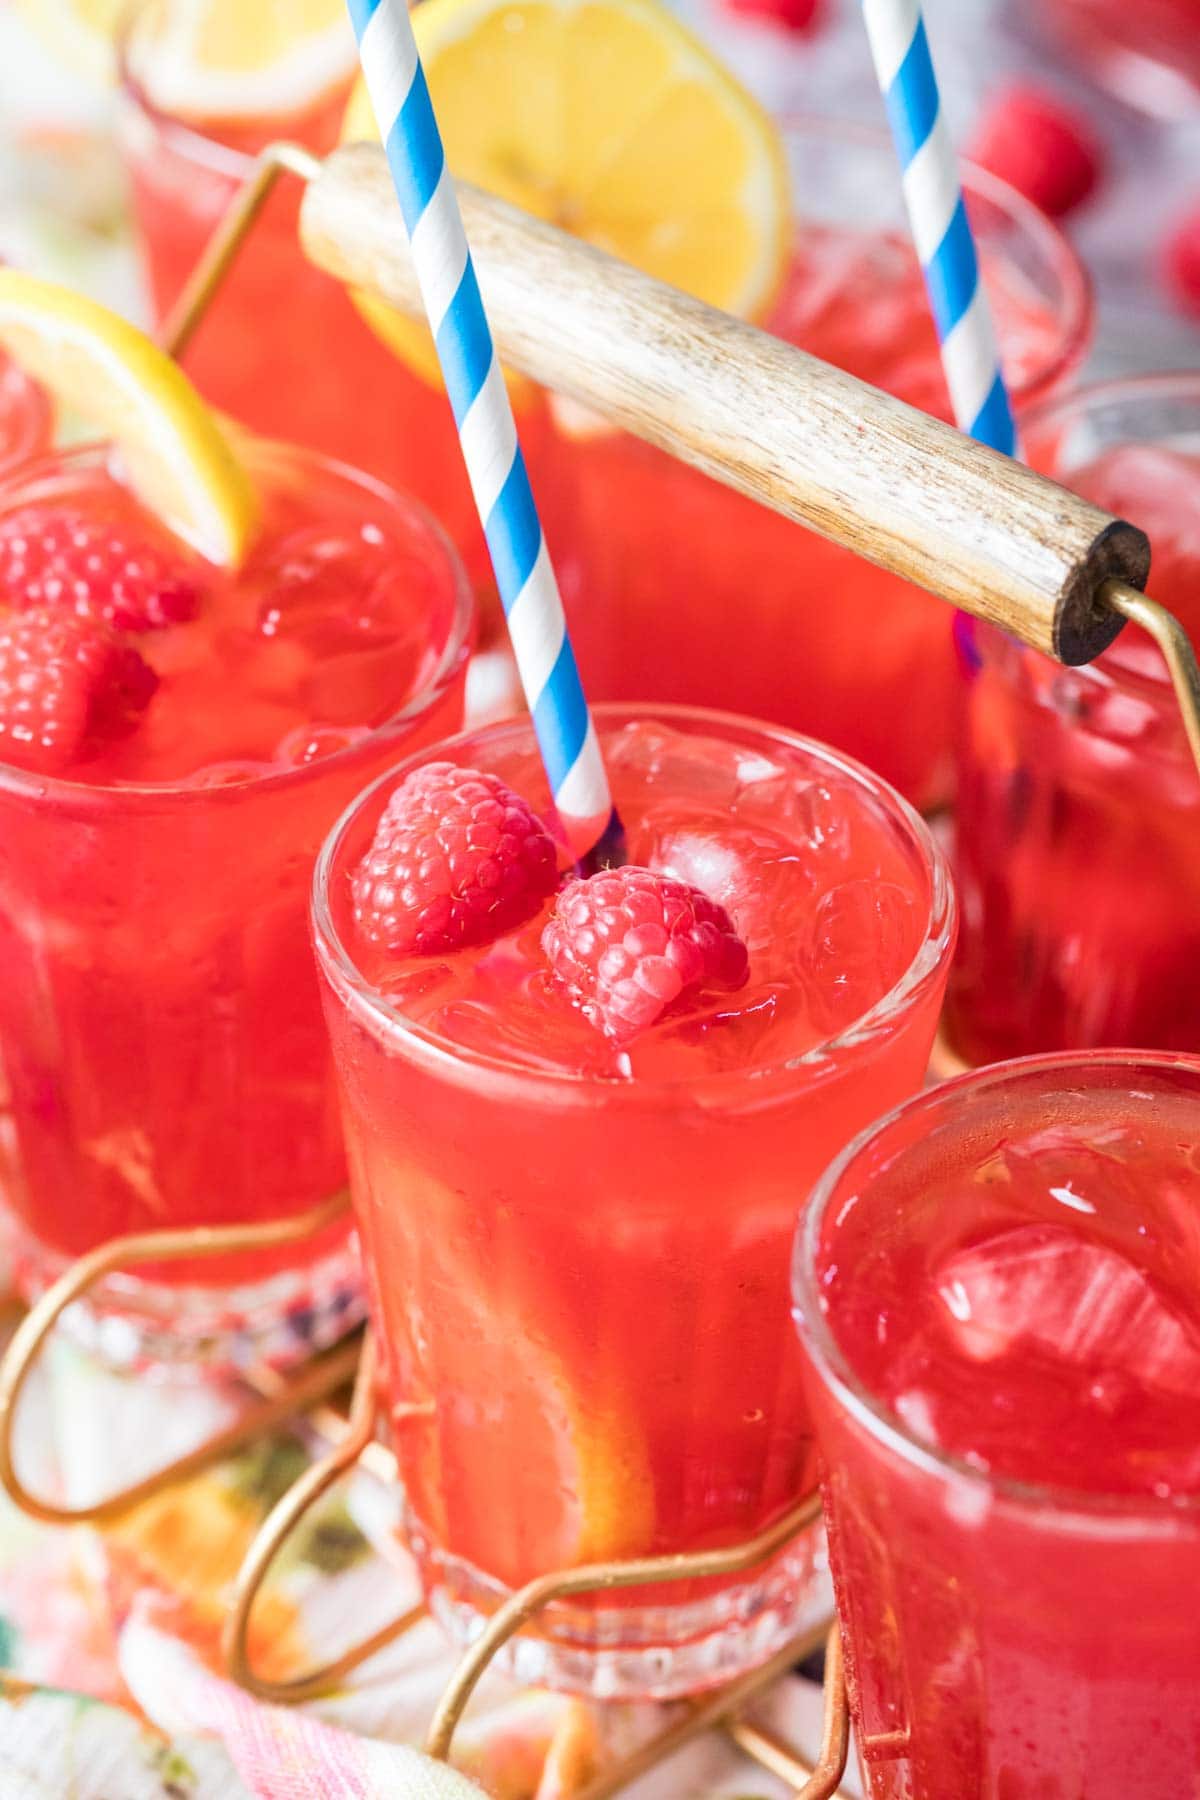 Glasses of red colored lemonade garnished with fresh berries and lemon slices.